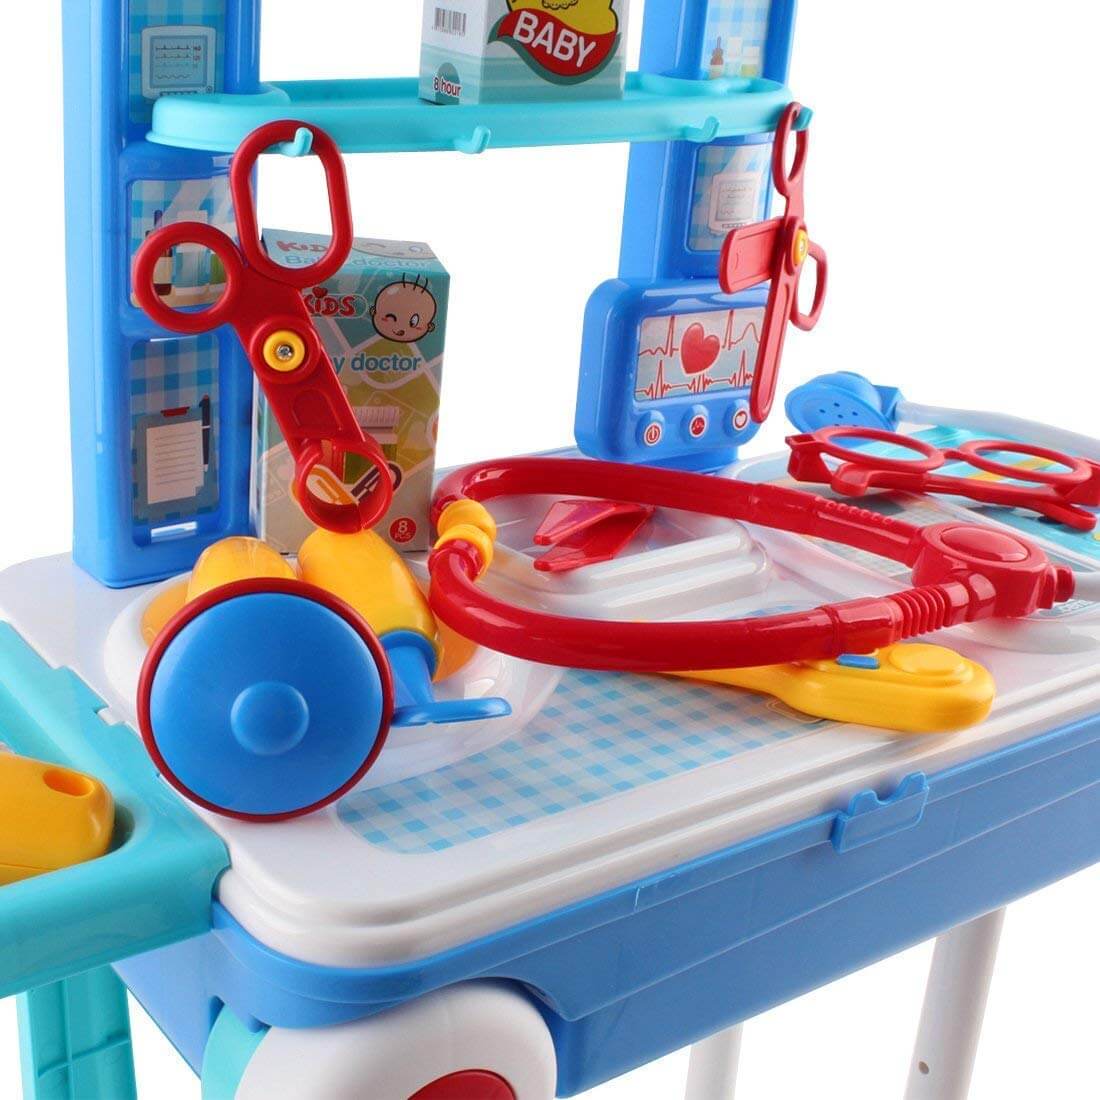 Portable Kids Doctor Nurse Medical Role Play Set Case Baby Kit Educational Toy E 